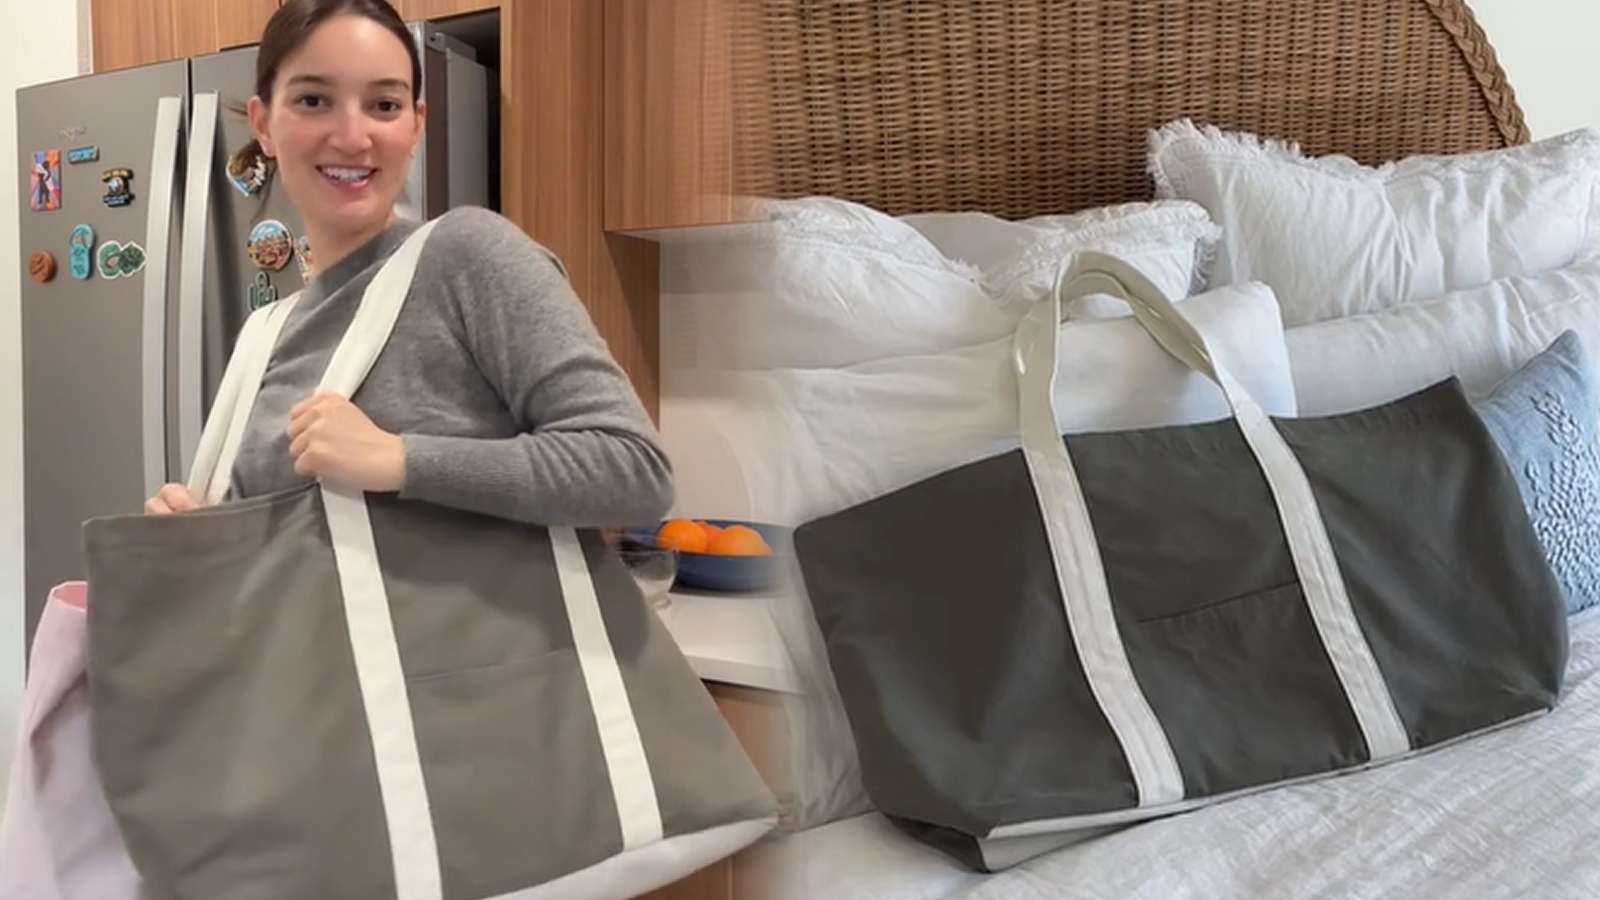 Internet outraged after influencer's ugly $120 tote bag sells out